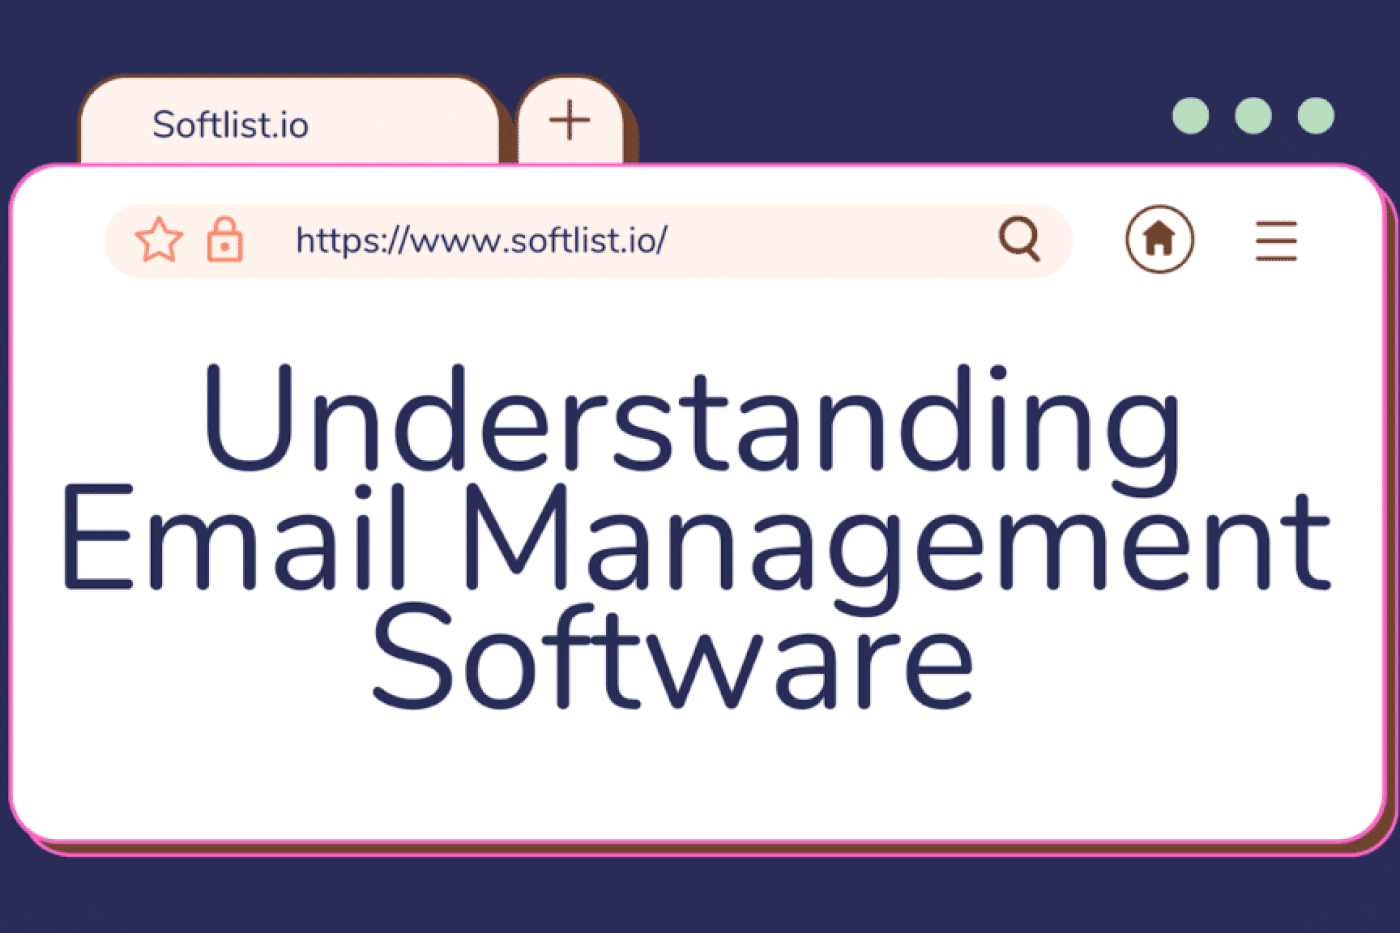 email management software